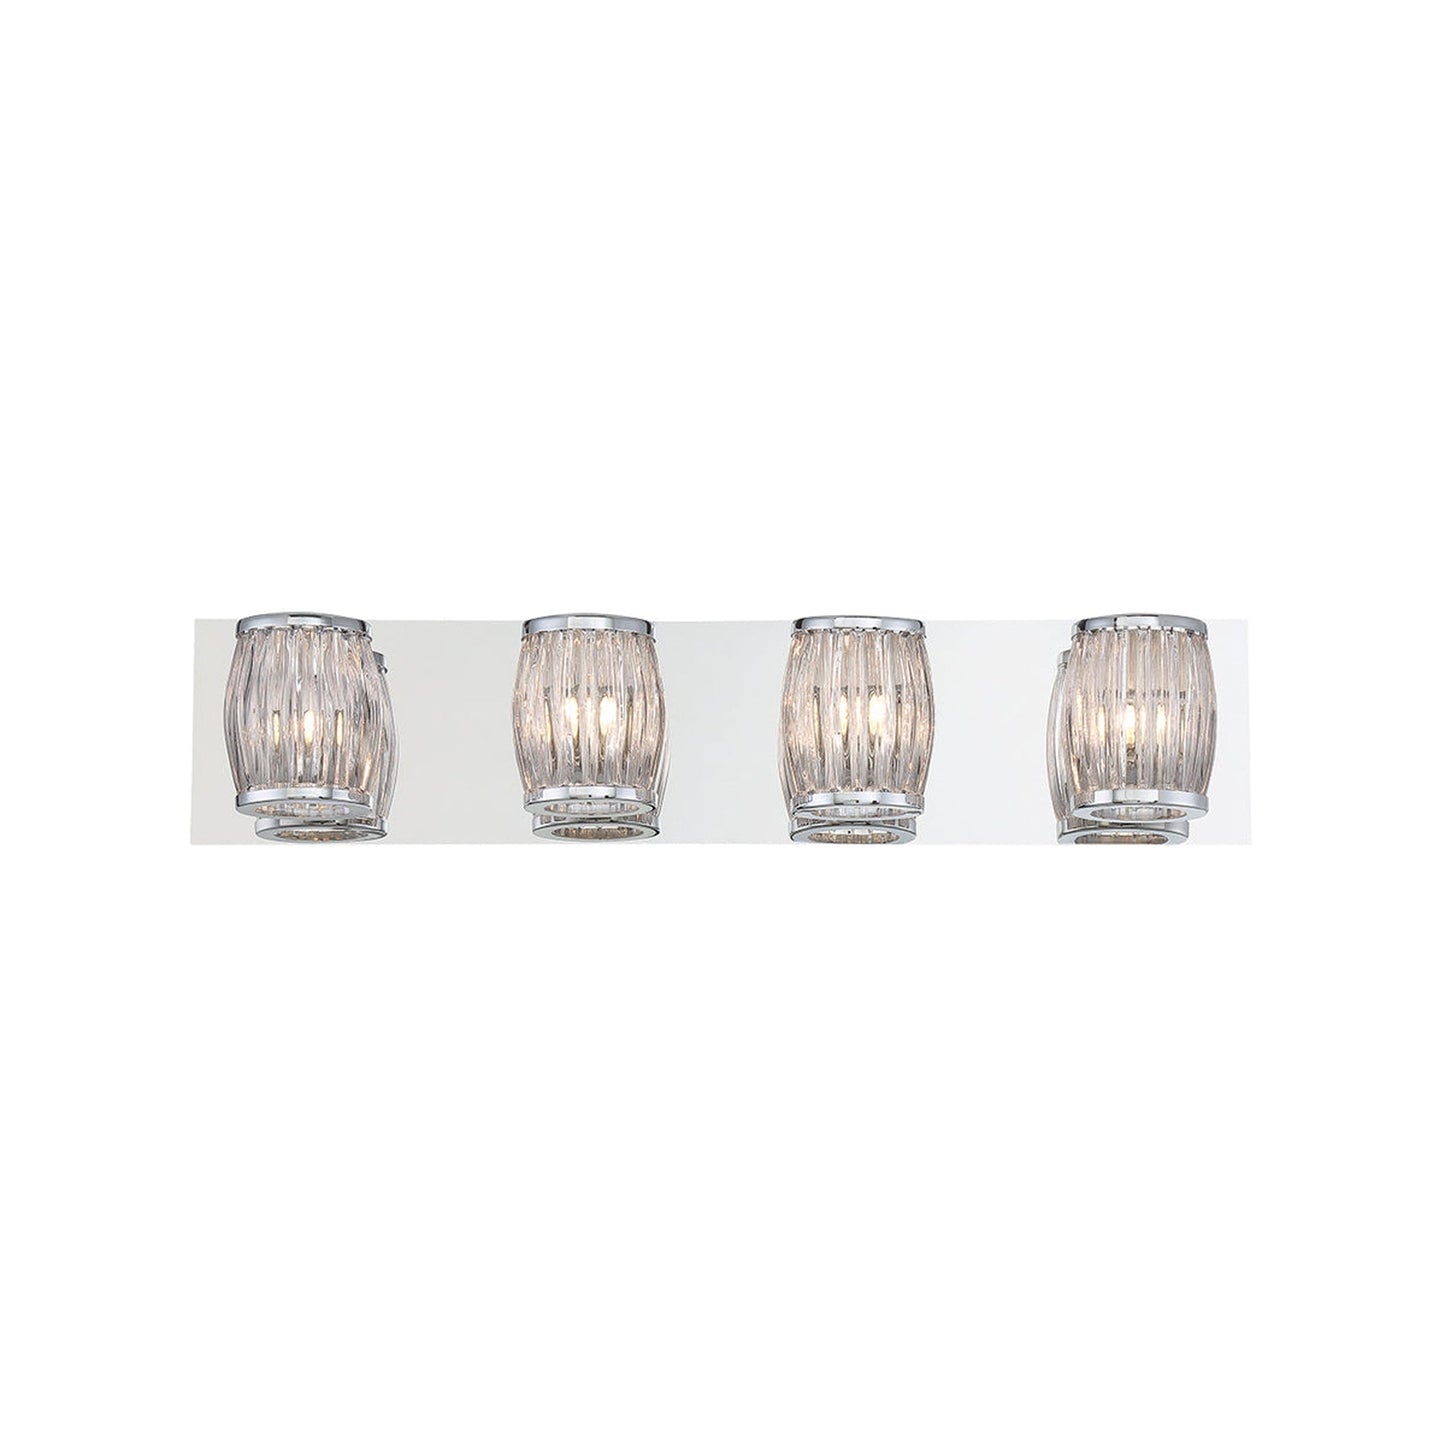 Eurofase Lighting Barile 25" 4-light Dimmable Halogen Bulb Chrome Bath Bar With Barrel Shaped Clear Glass Shades